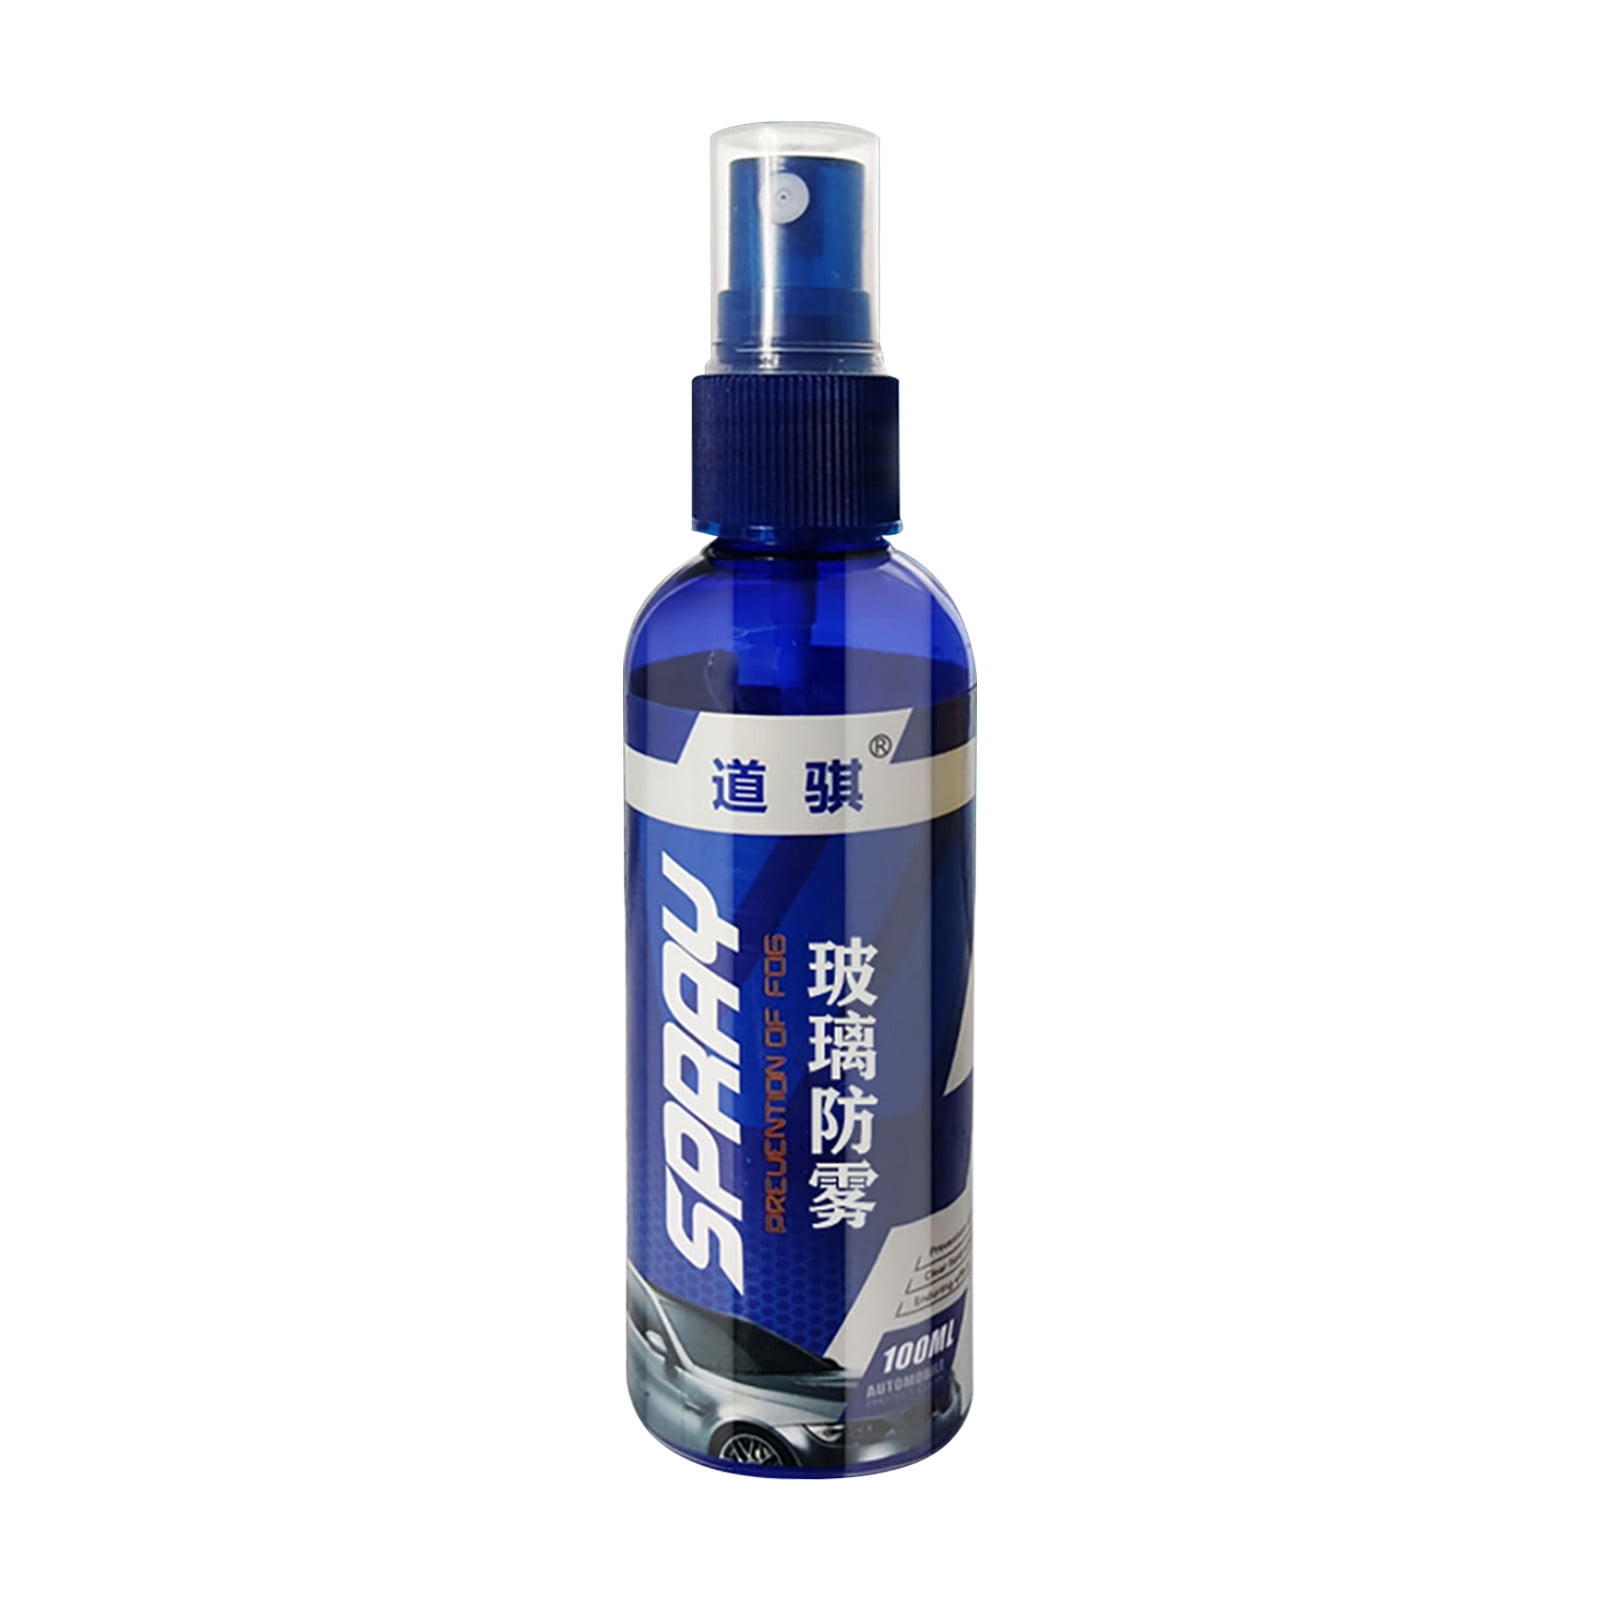 Automobile Windshield Spray, Rearview Mirror Windshield Glasses Anti-Fog,  Anti-Haze and Anti-Fog Agent, Cleaning Stains, Dust, Hydrophobic